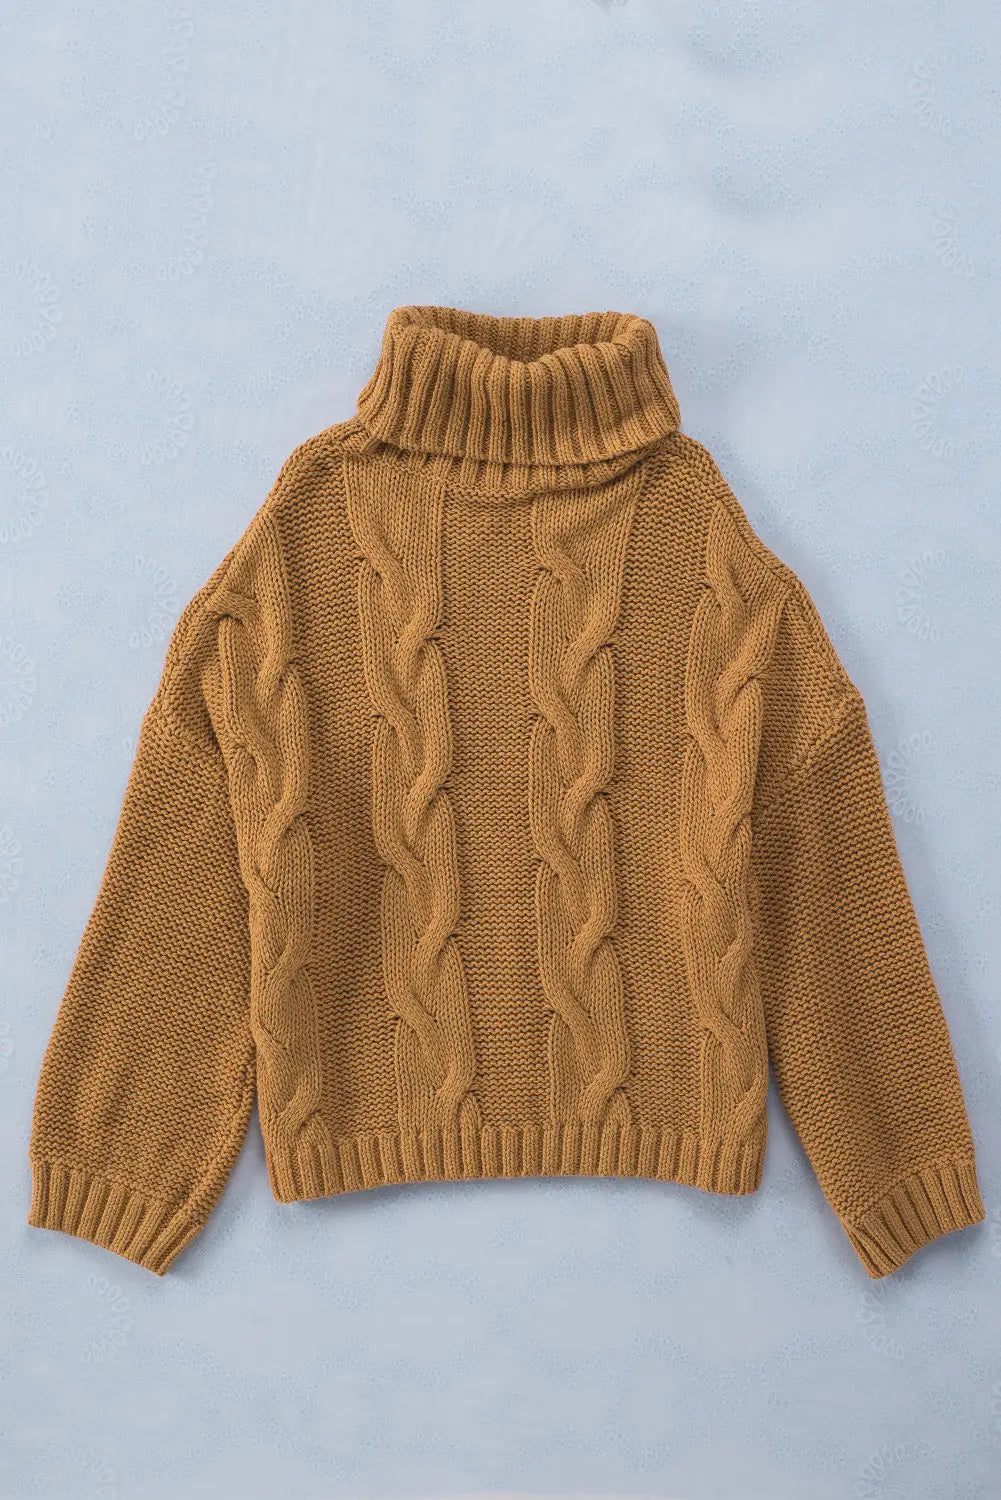 Cuddle weather cable knit handmade turtleneck sweater - sweaters & cardigans